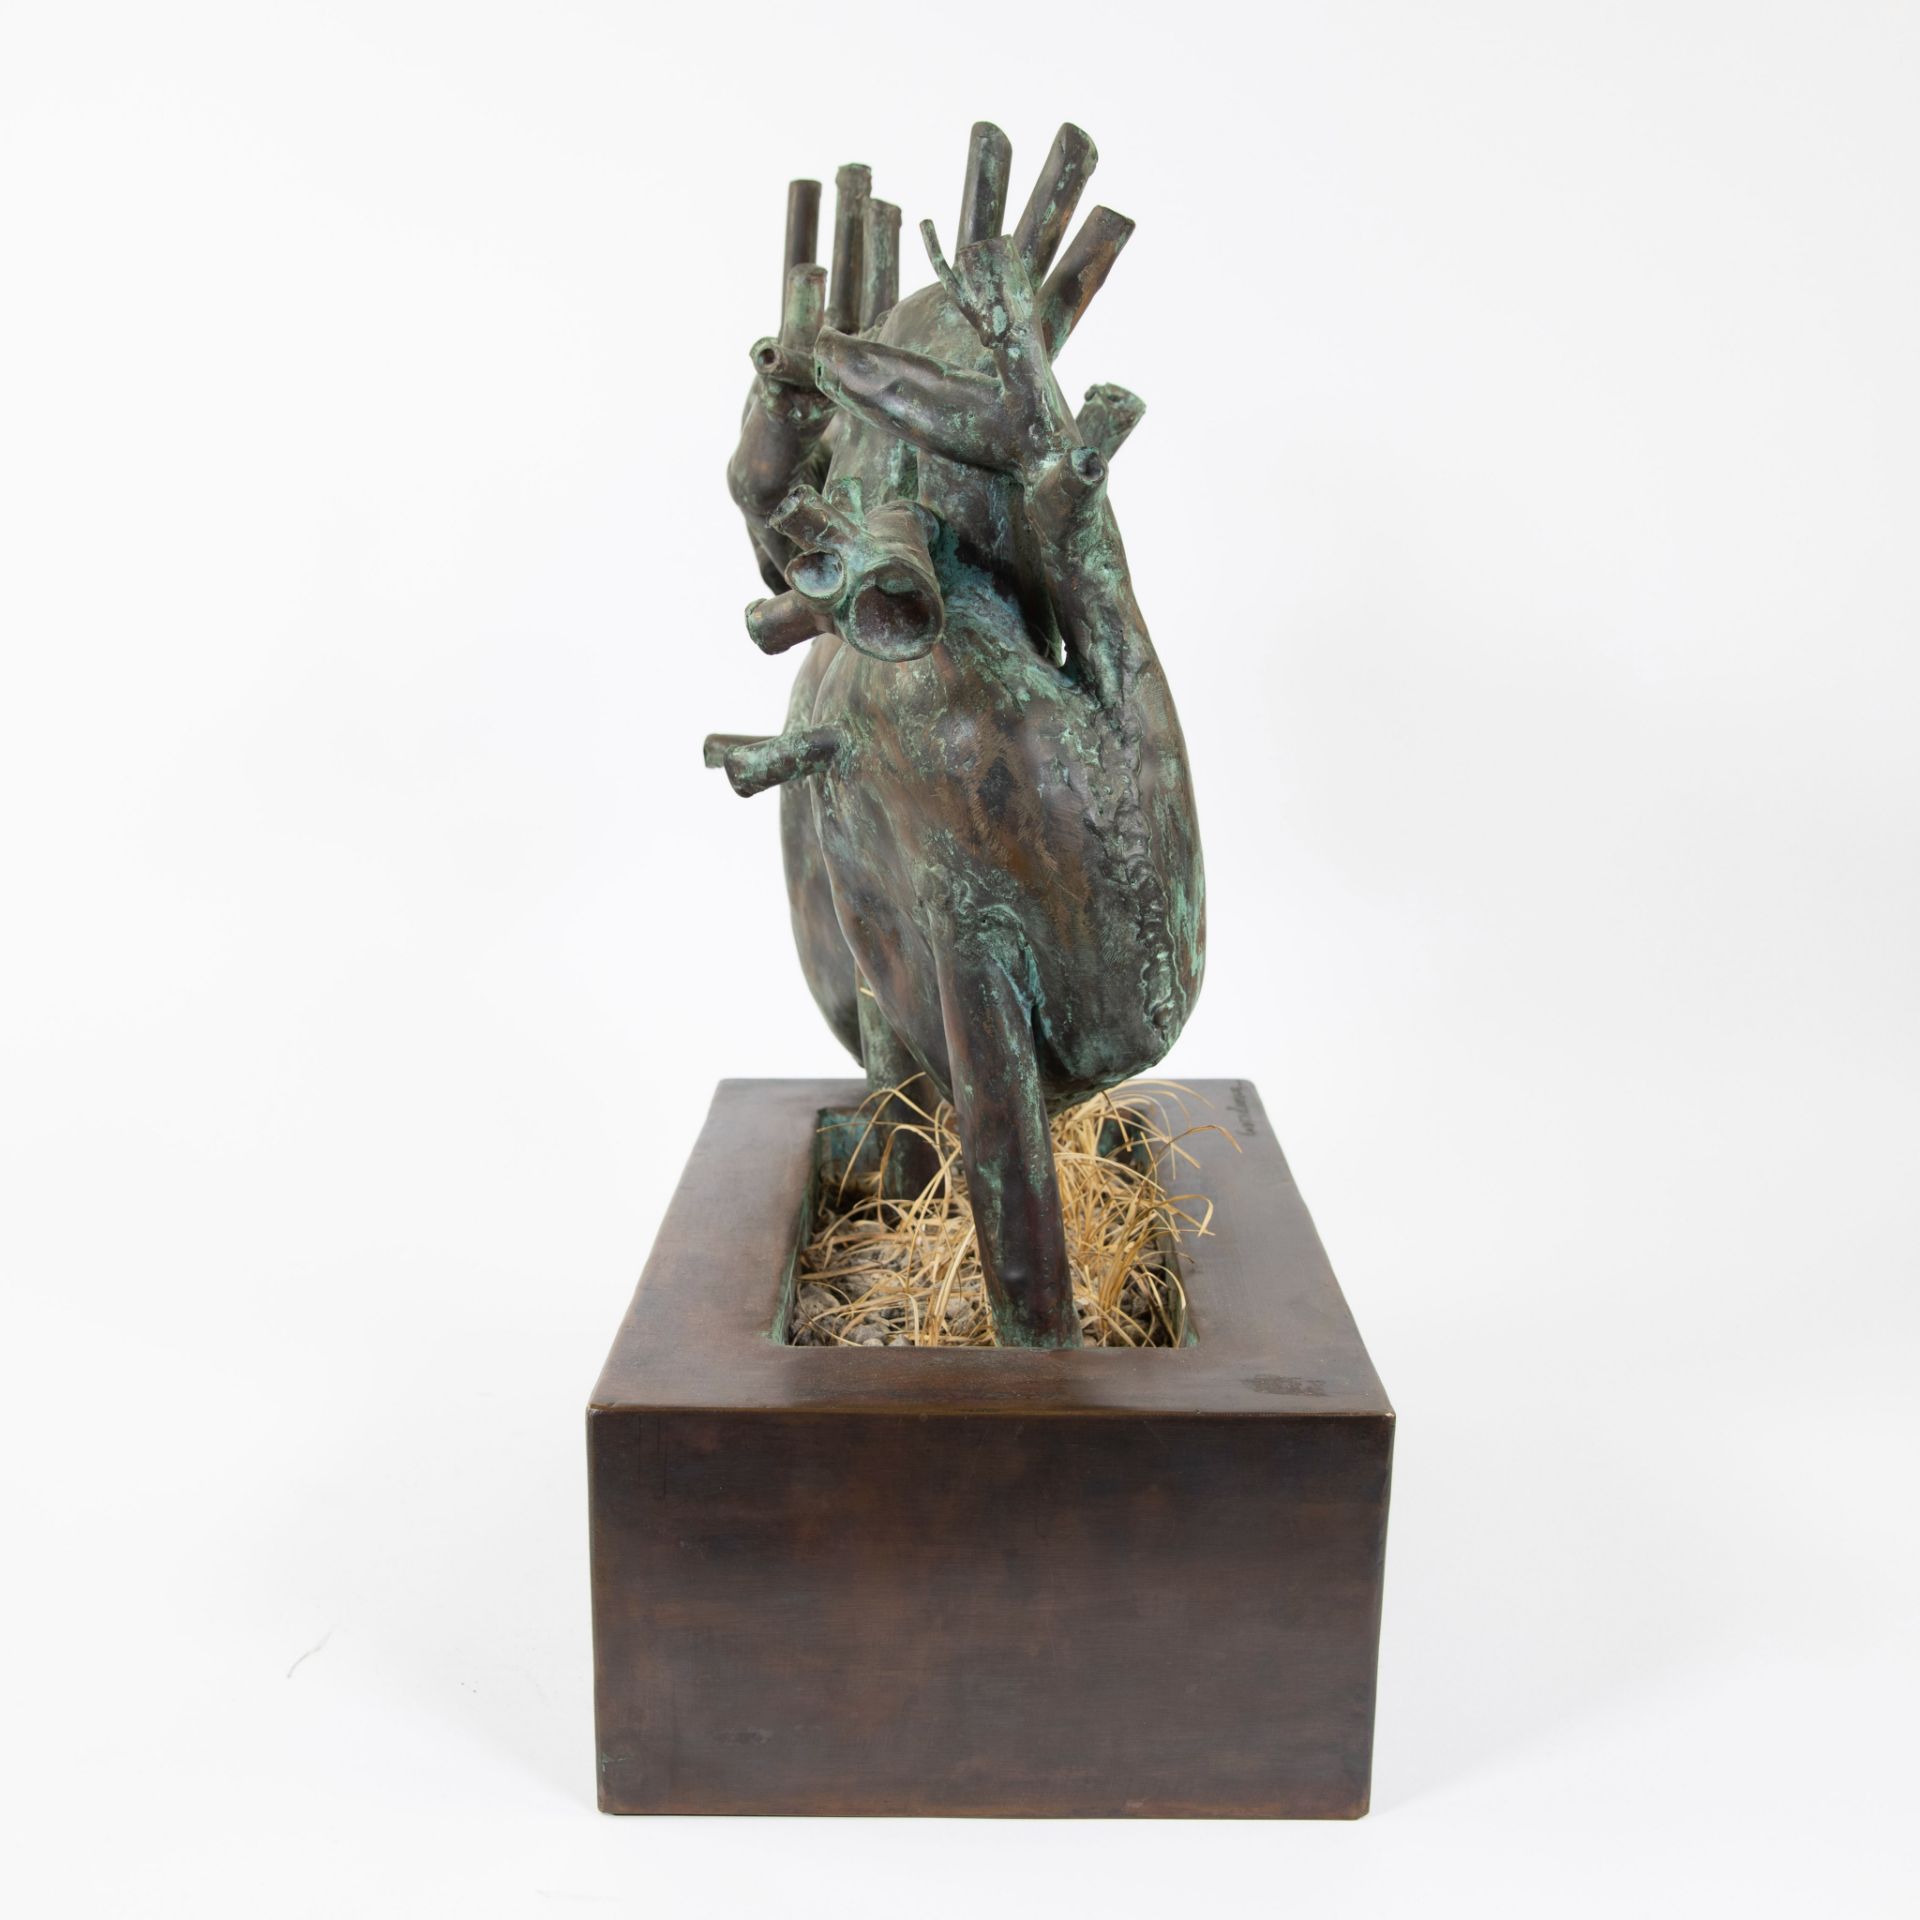 Coeur d'amour, 2 patinated bronze hearts, signed. - Image 6 of 6